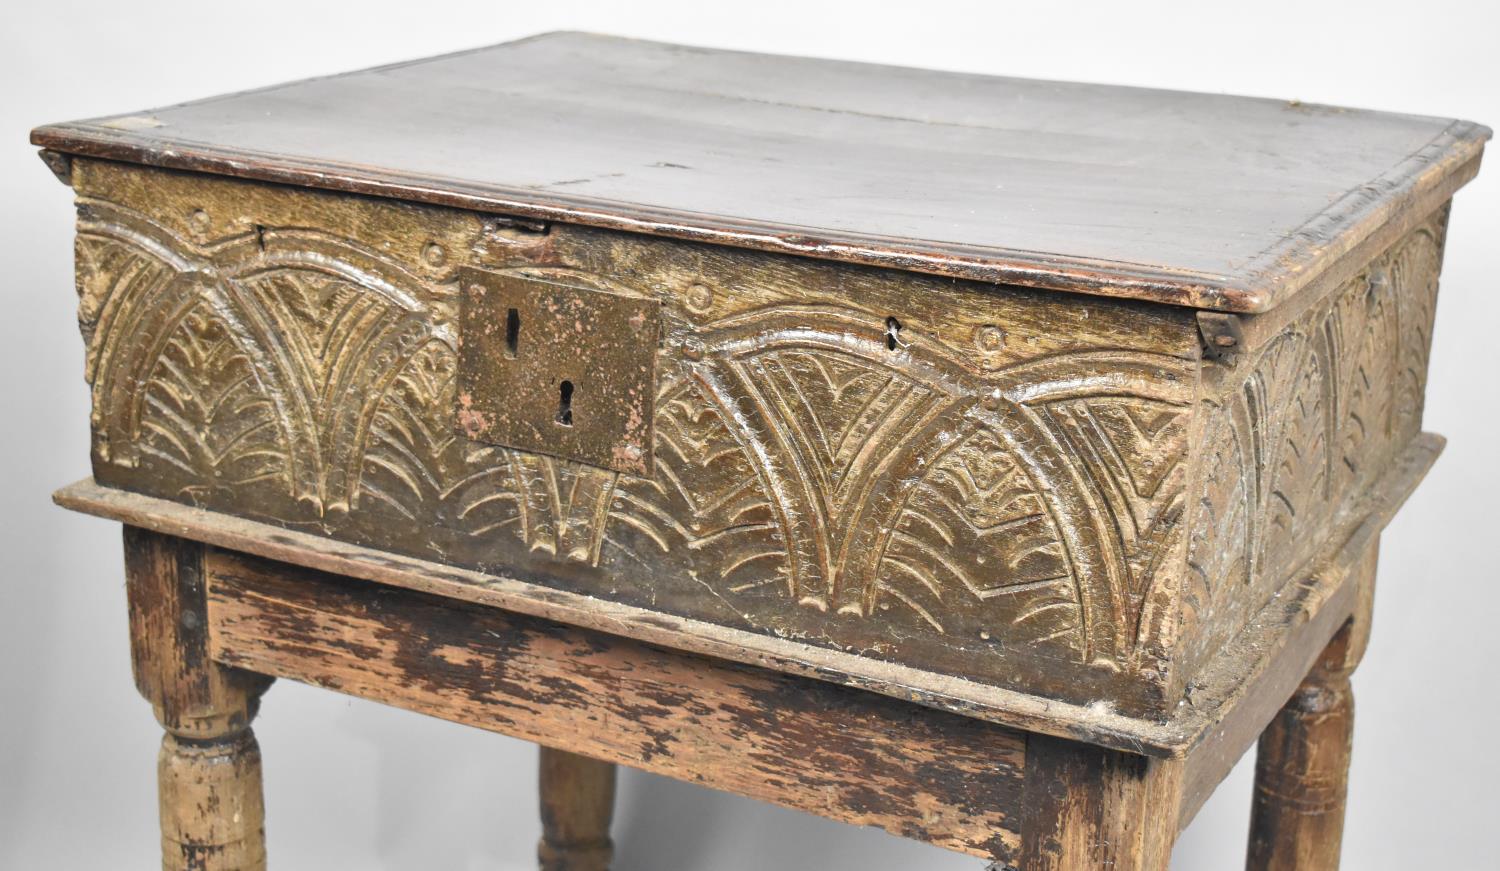 A Late 17th/Early 18th Century Carved Welsh Oak Boarded Bible Box on Stand, 66x53x71cms High - Image 2 of 3